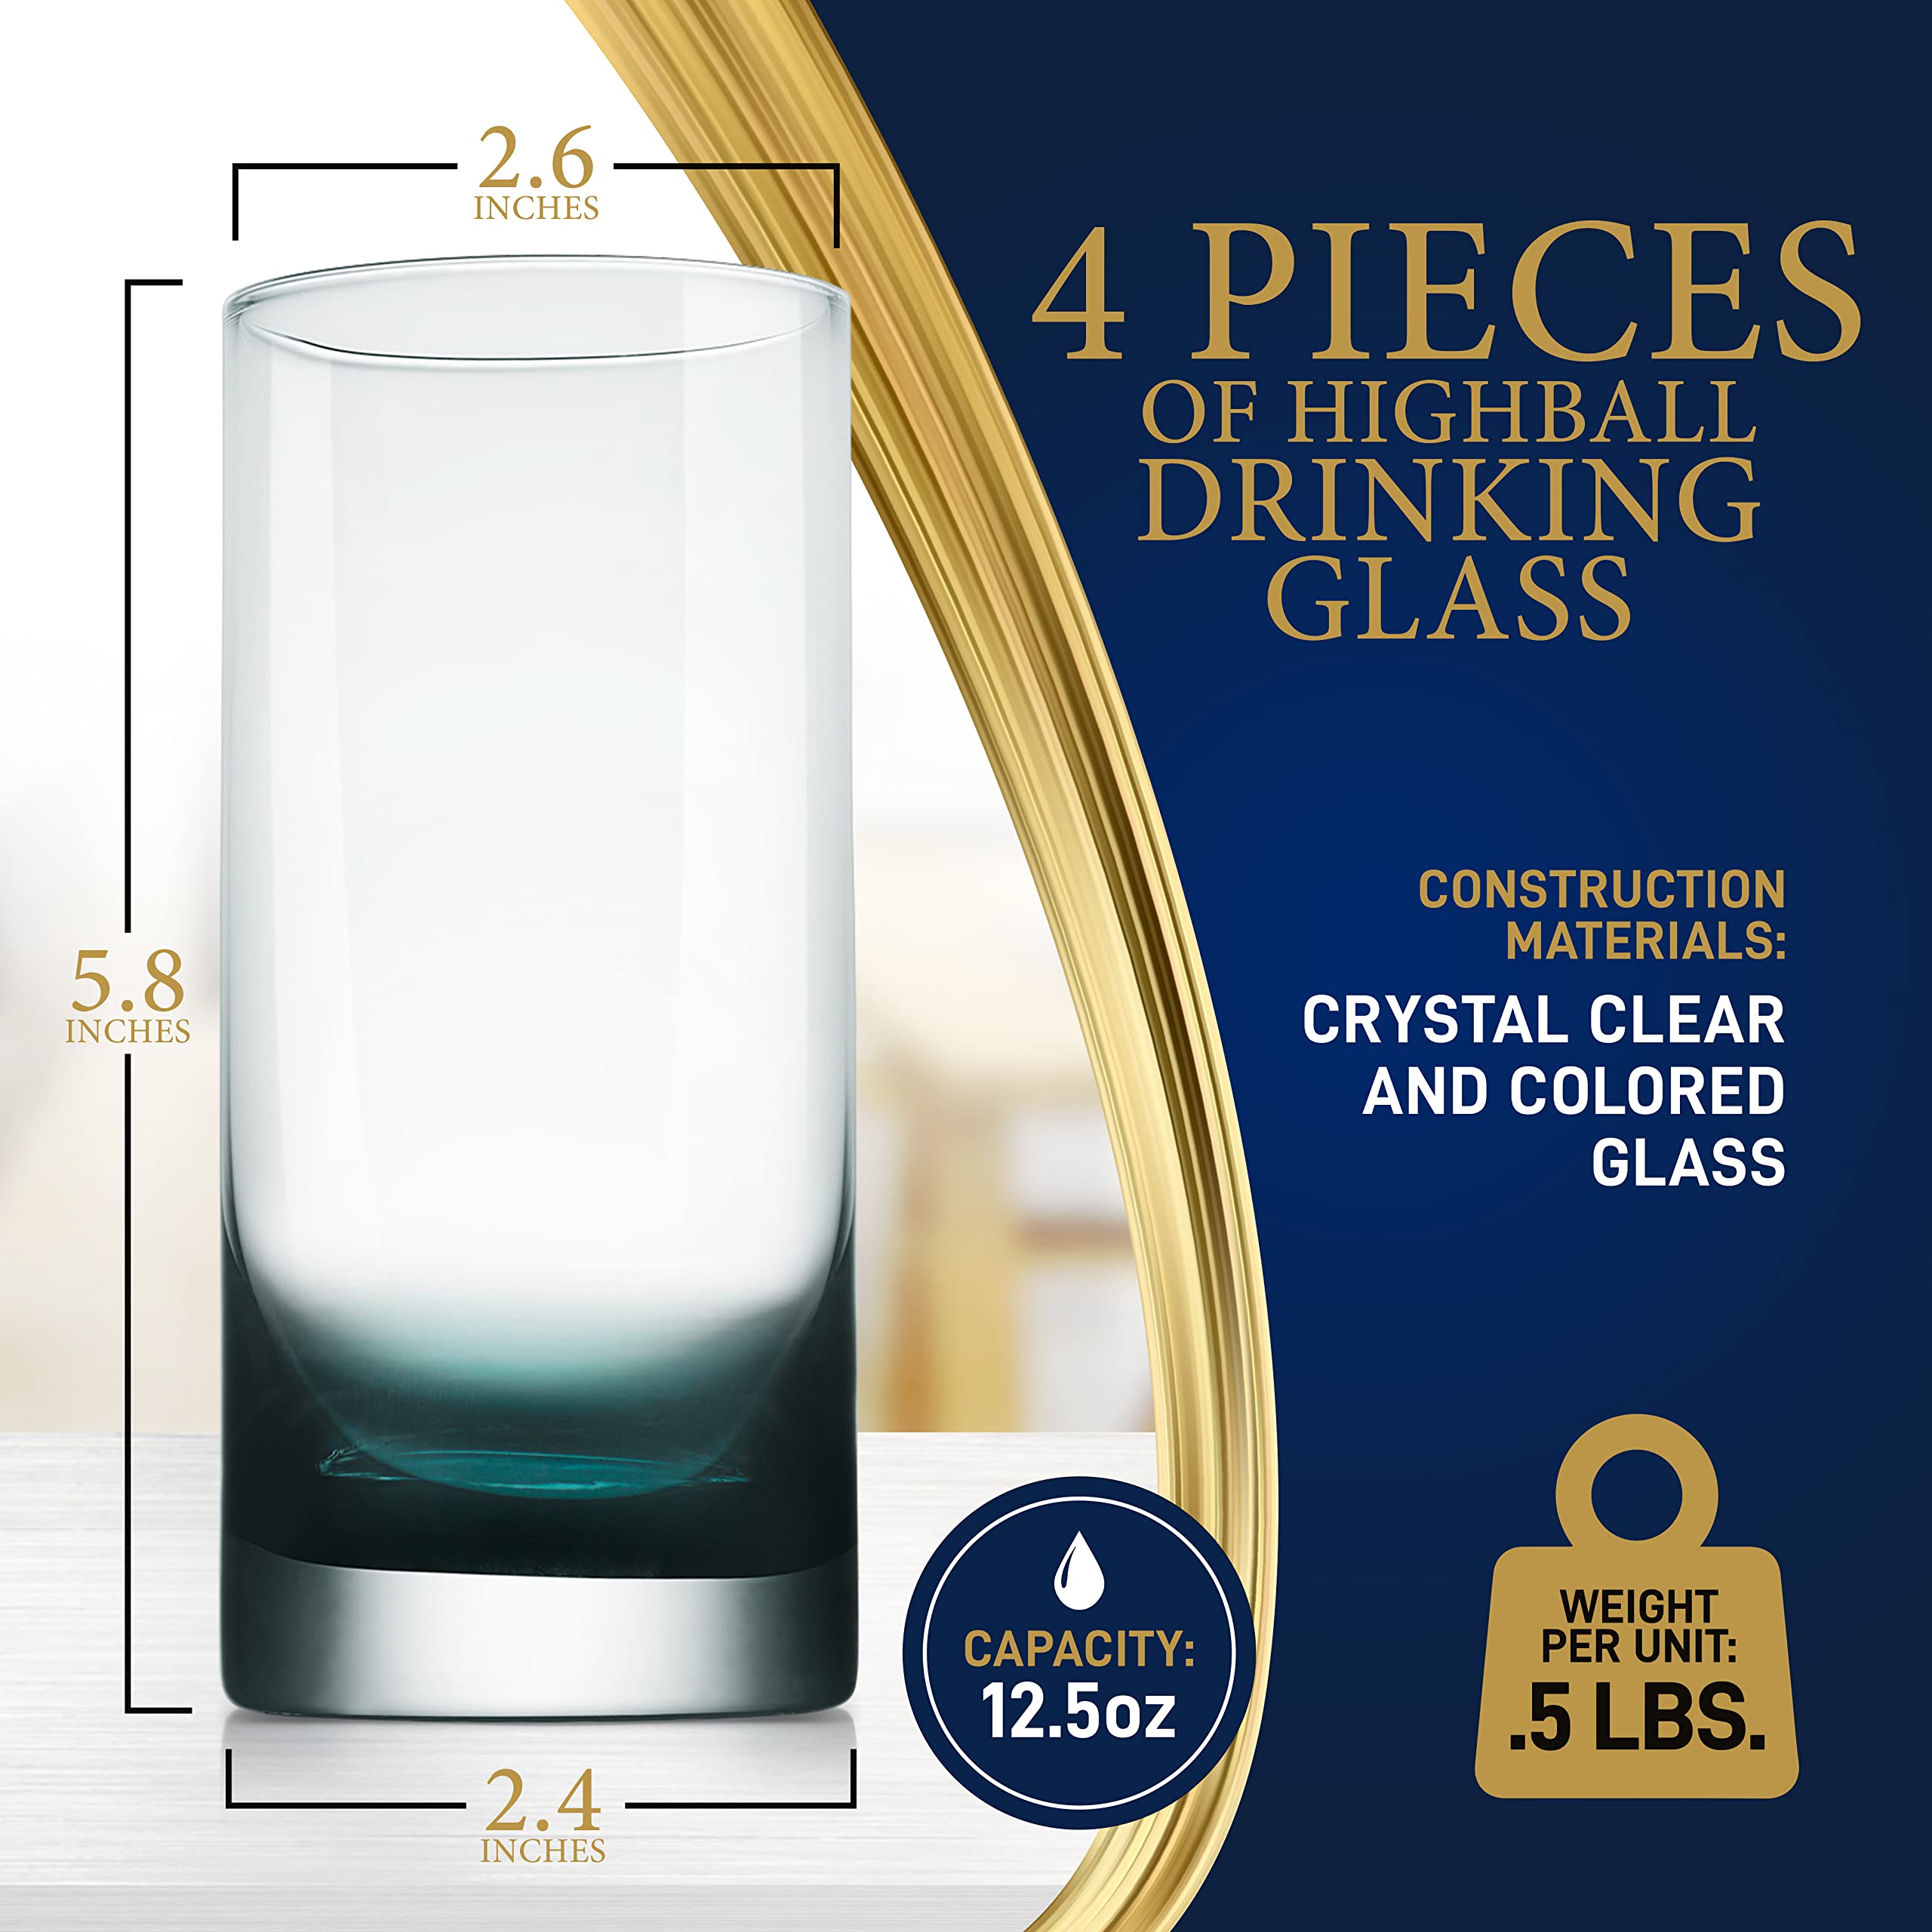 NutriChef 12.5oz Highball Drinking Glasses - Set of 4 Heavy Base Tall Tumbler Clear Glassware for Water, Wine, Beer, Liquor, Gin, Cocktail, Whiskey, Juice, Iced Coffee, Mixed Drinks, Dishwasher Safe